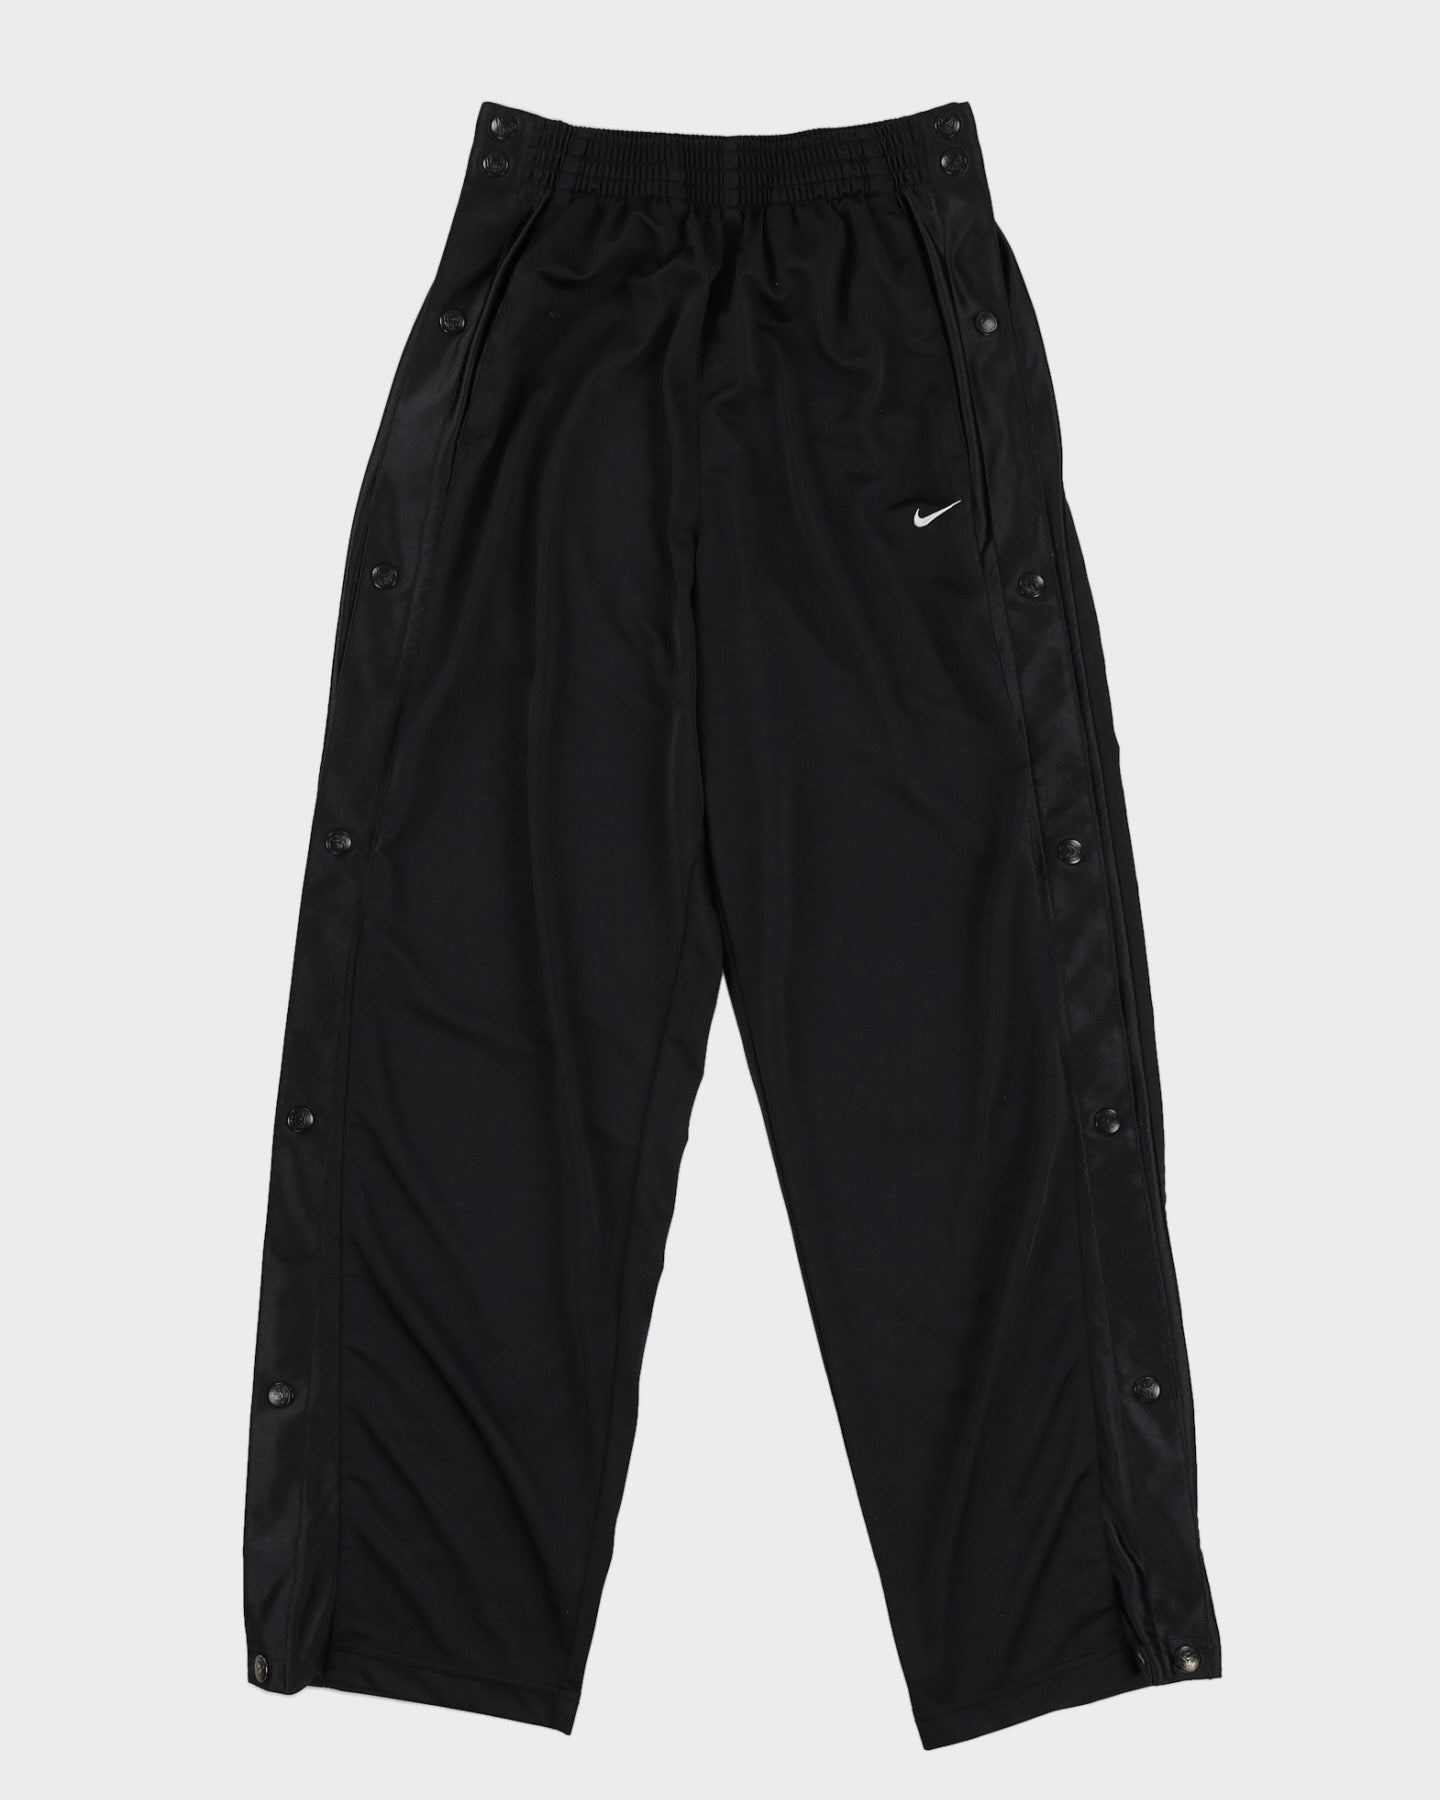 00s Y2K Nike Black Buttoned Up Track Bottoms - W34 L33